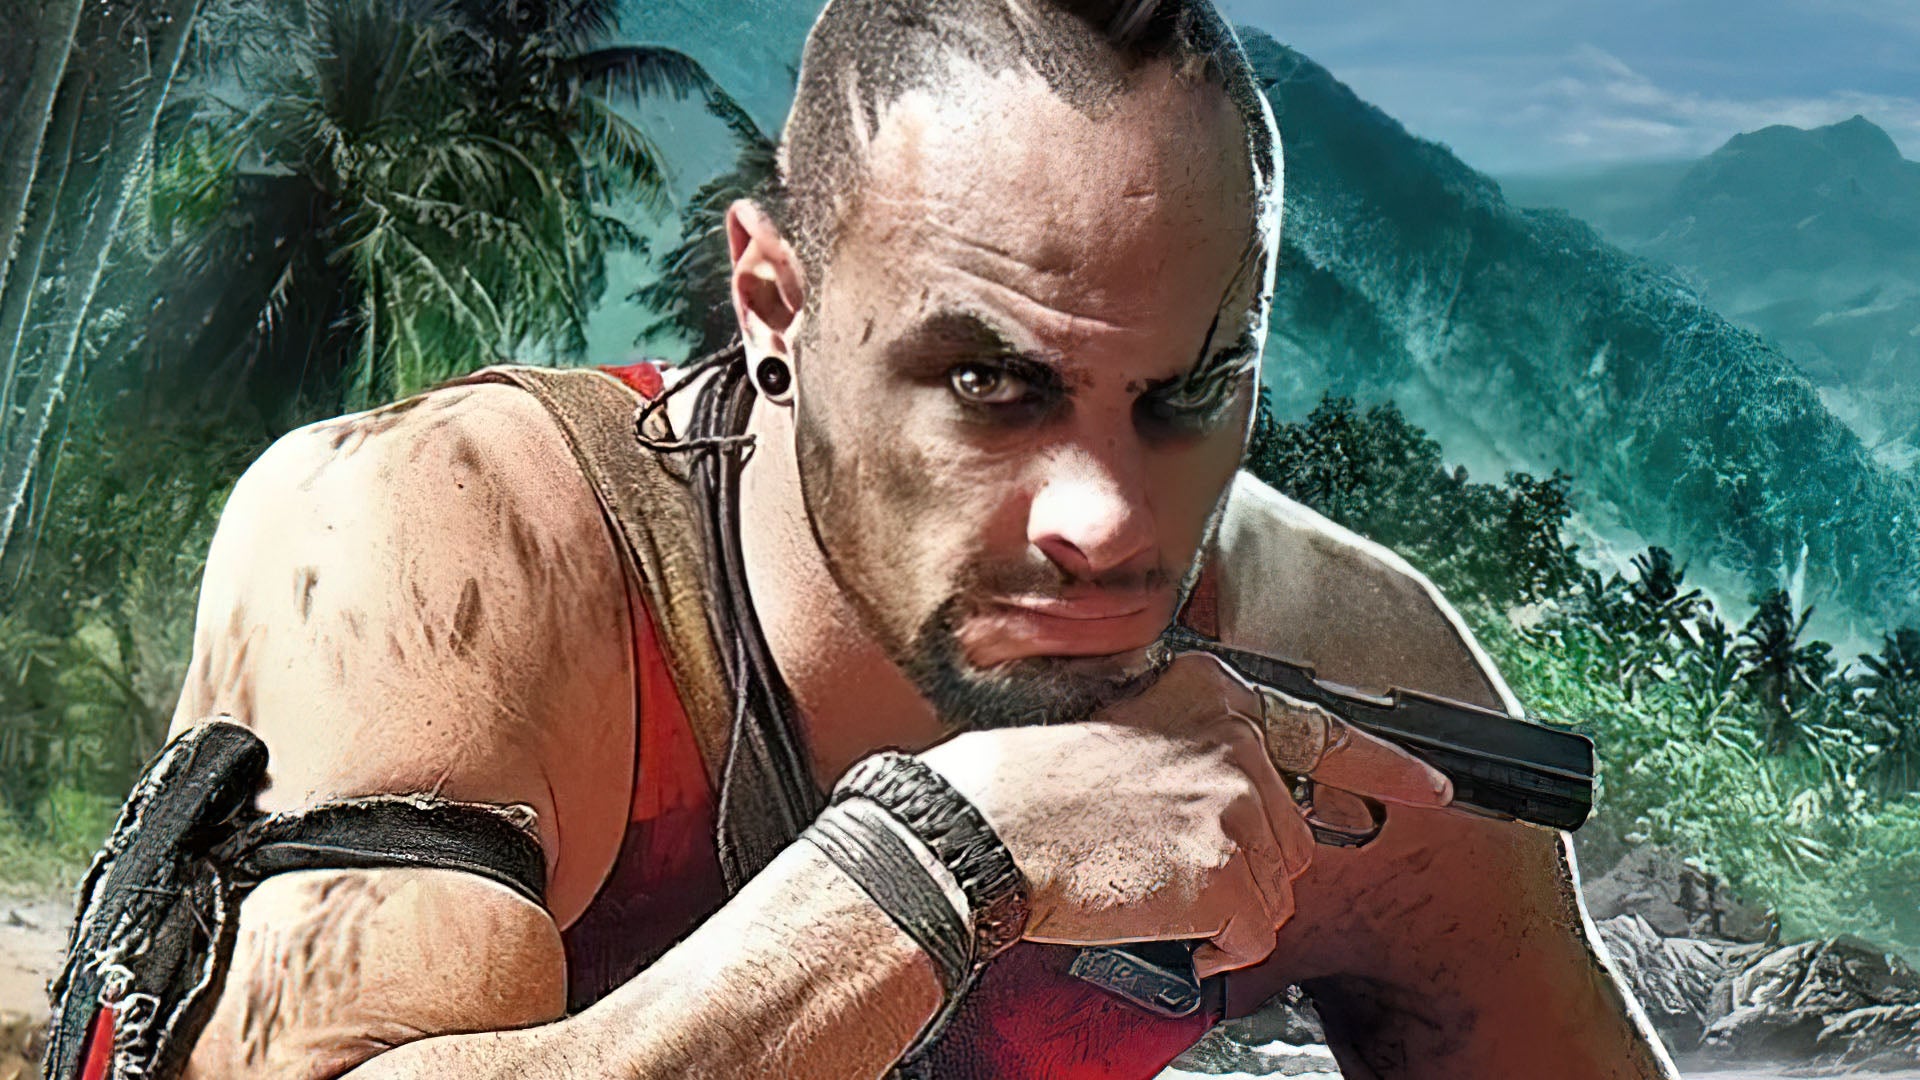 Image for Far Cry 3 -  2012 Retro PC Time Capsule vs PS3 vs Xbox 360 - Console Perf Disaster